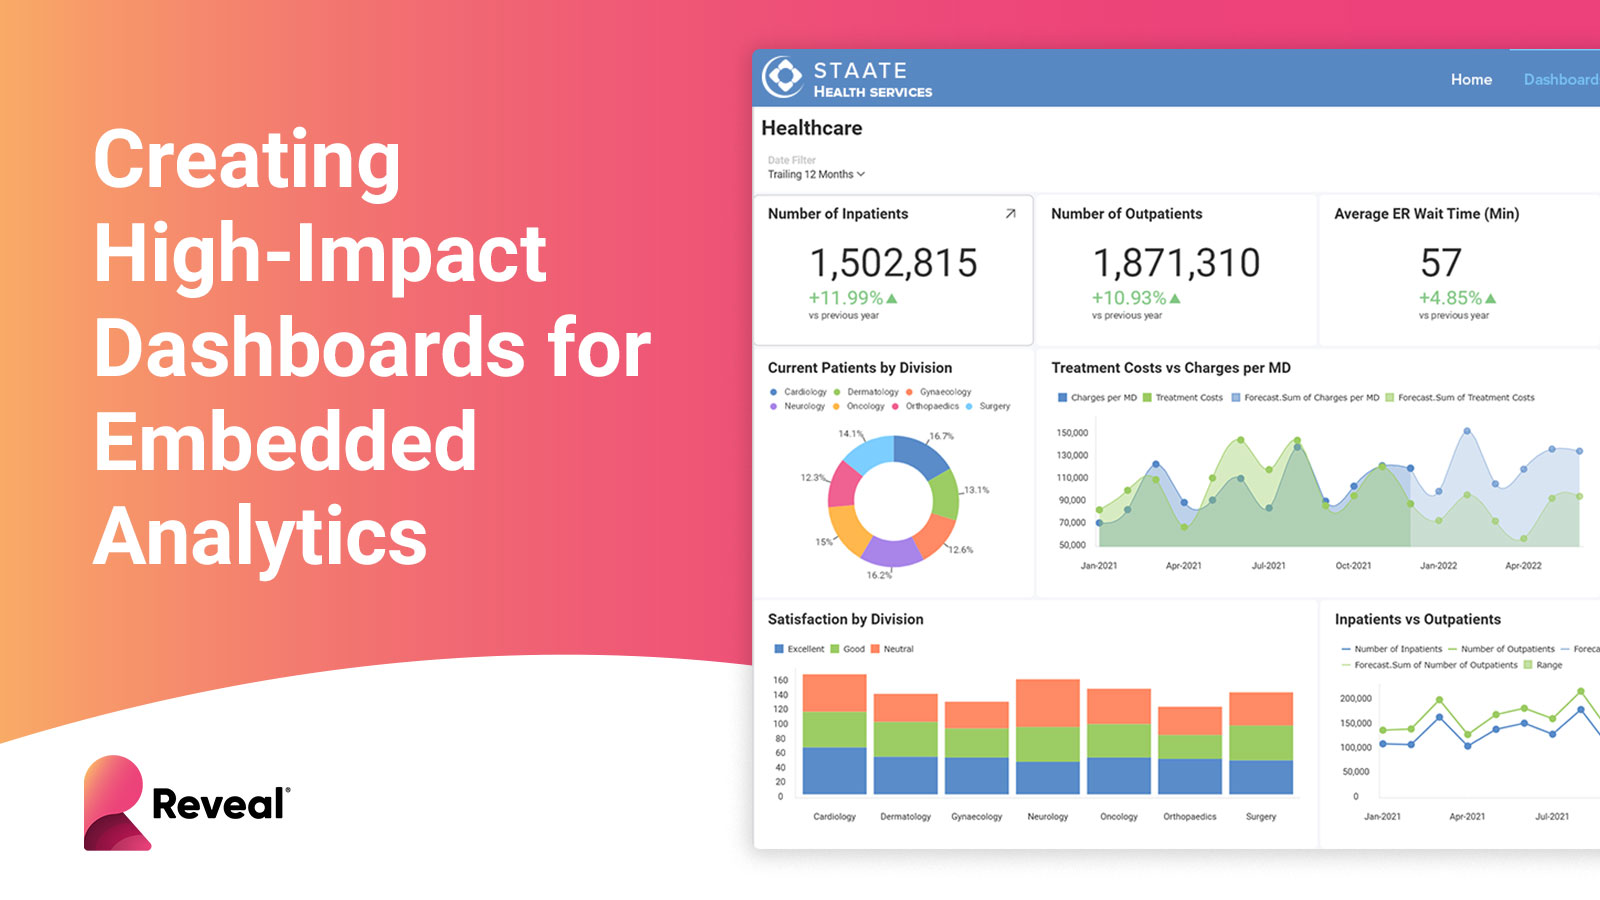 Creating High-Impact Dashboards for Embedded Analytics